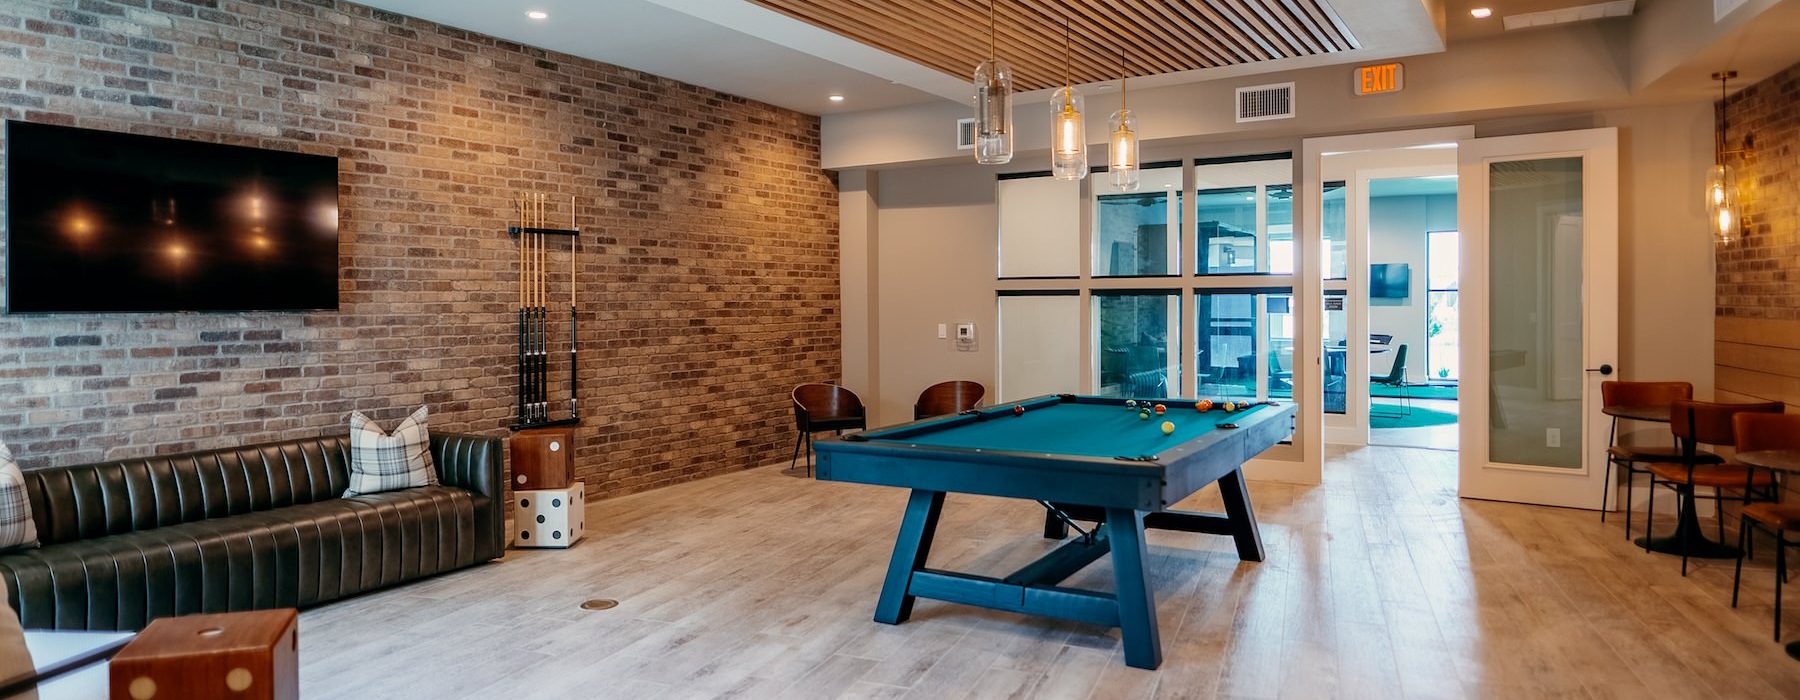 Large game room with billiards 